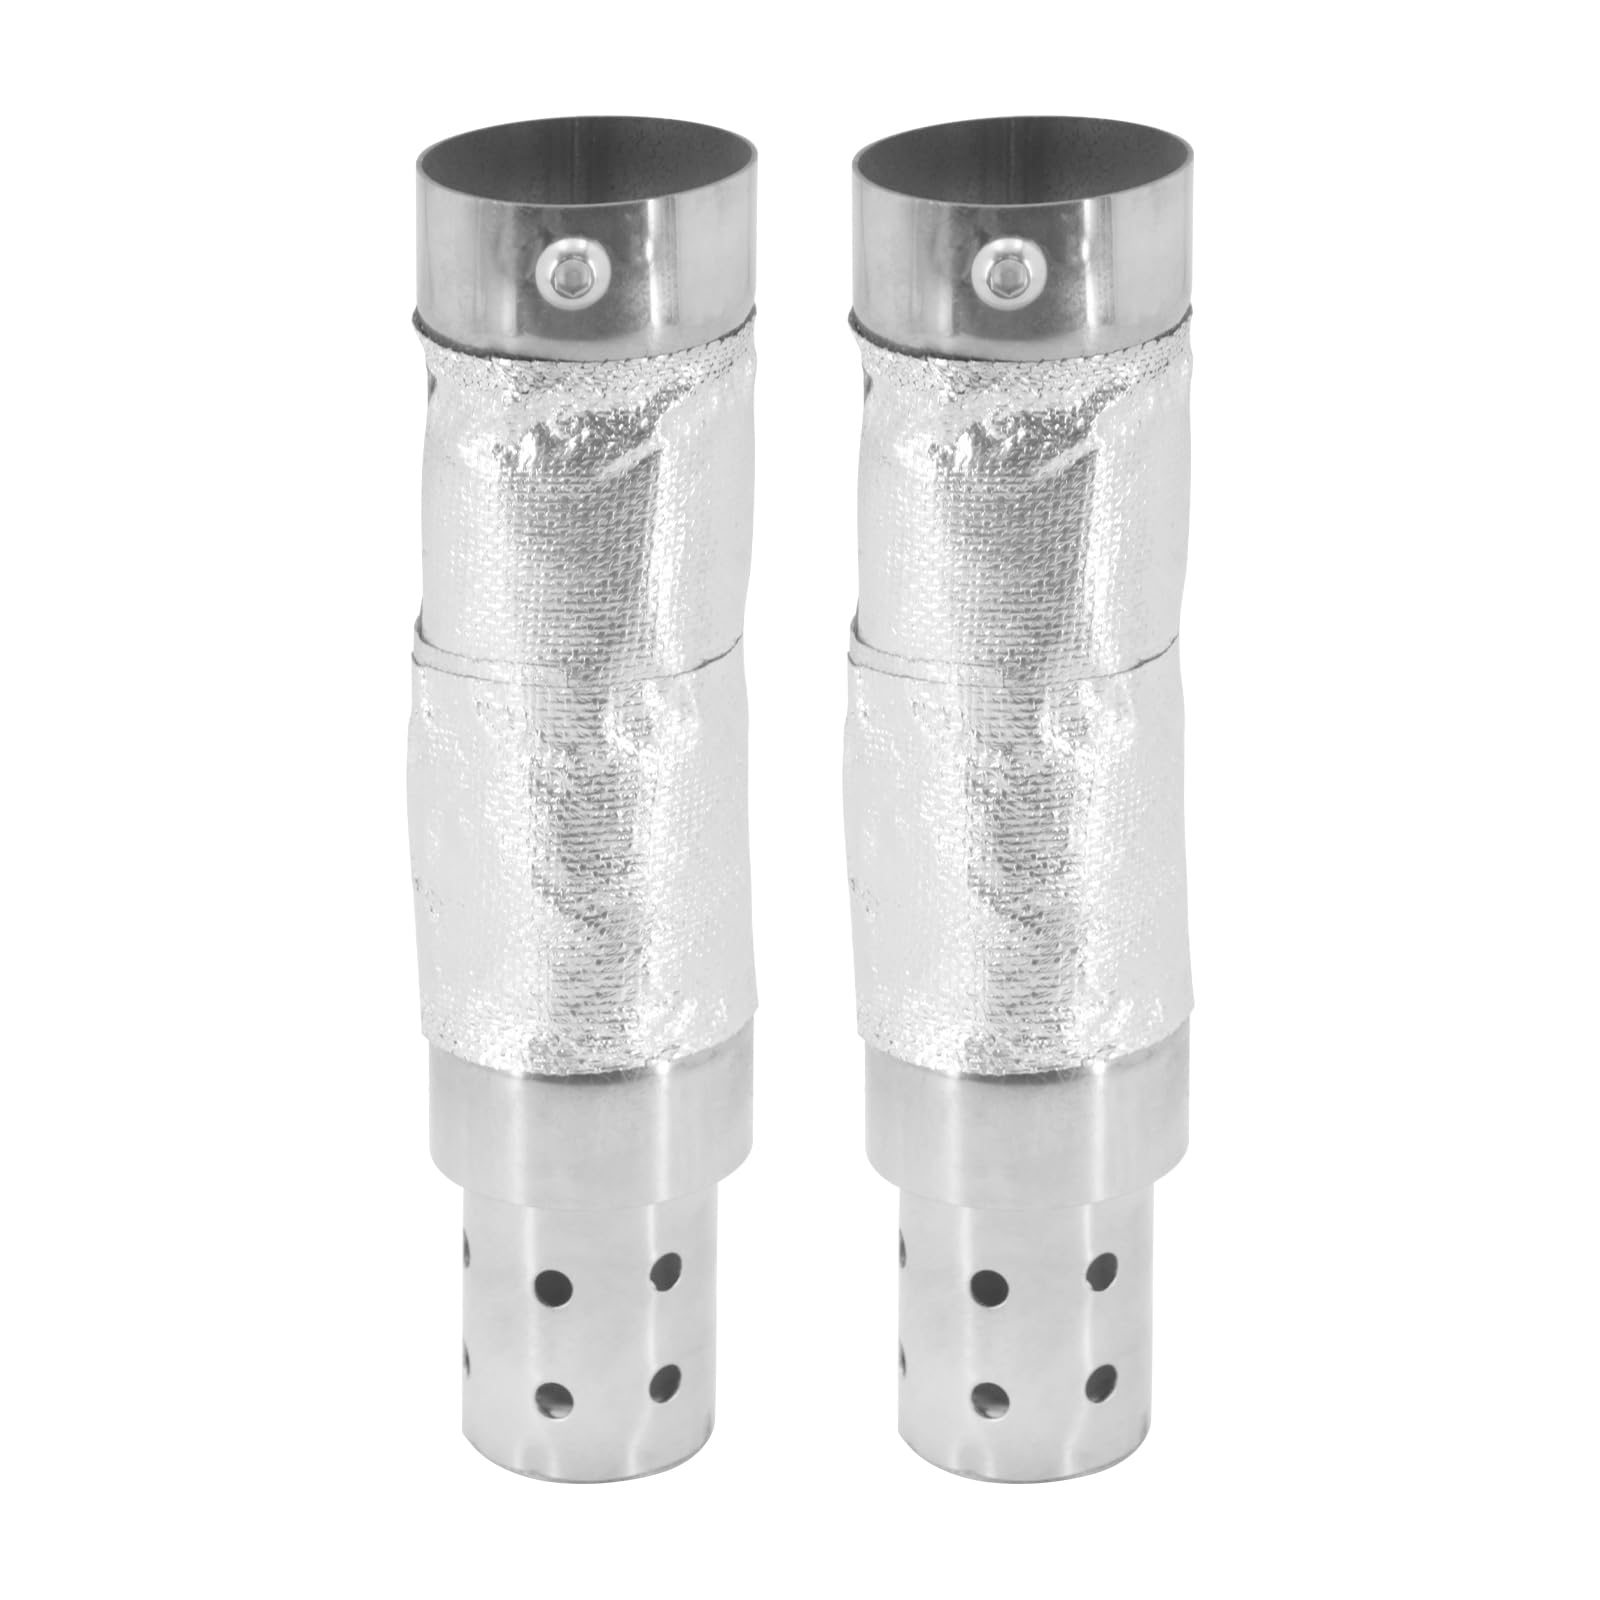 HDBUBALUS Motorcycle Quiet Baffle Noise Eliminator Universal Fit for 2 Inch Exhaust Systems 1 Pair von HDBUBALUS